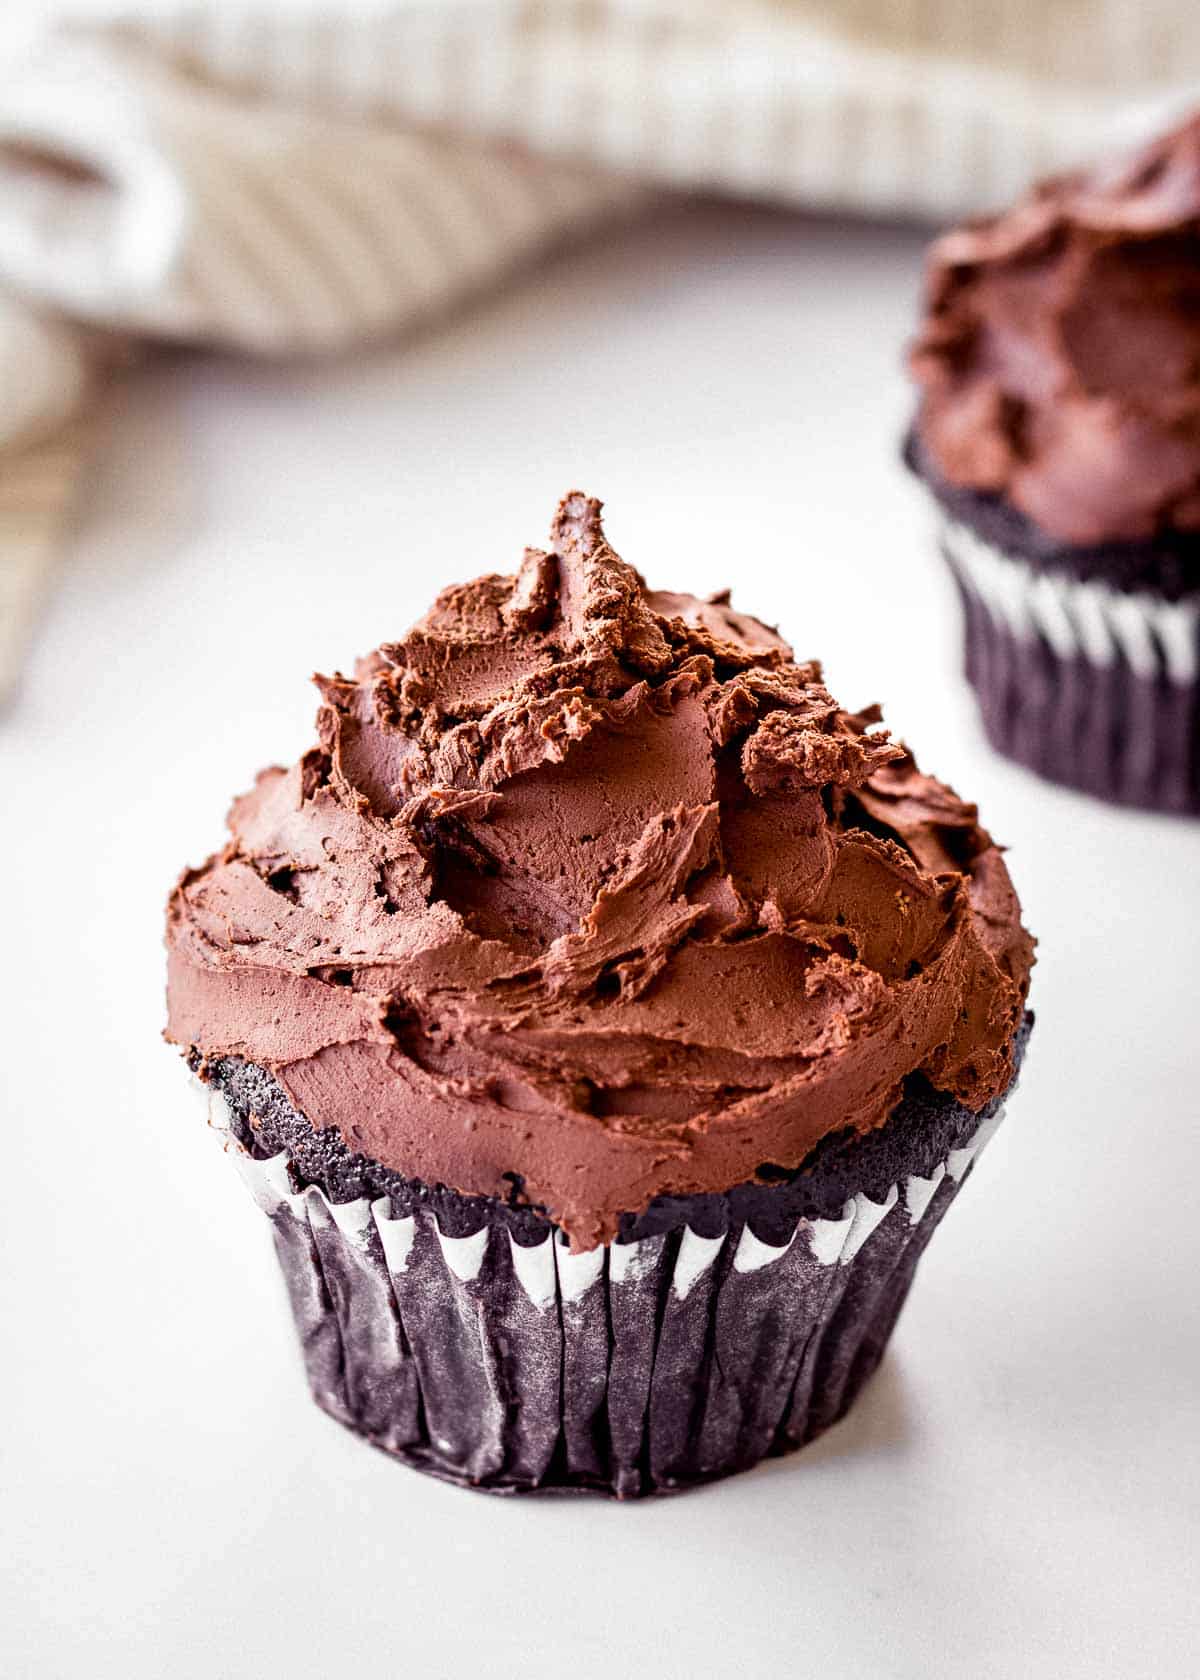 Two chocolate cupcakes decorated with vegan dark chocolate ganache. A tea towel sits in the background.